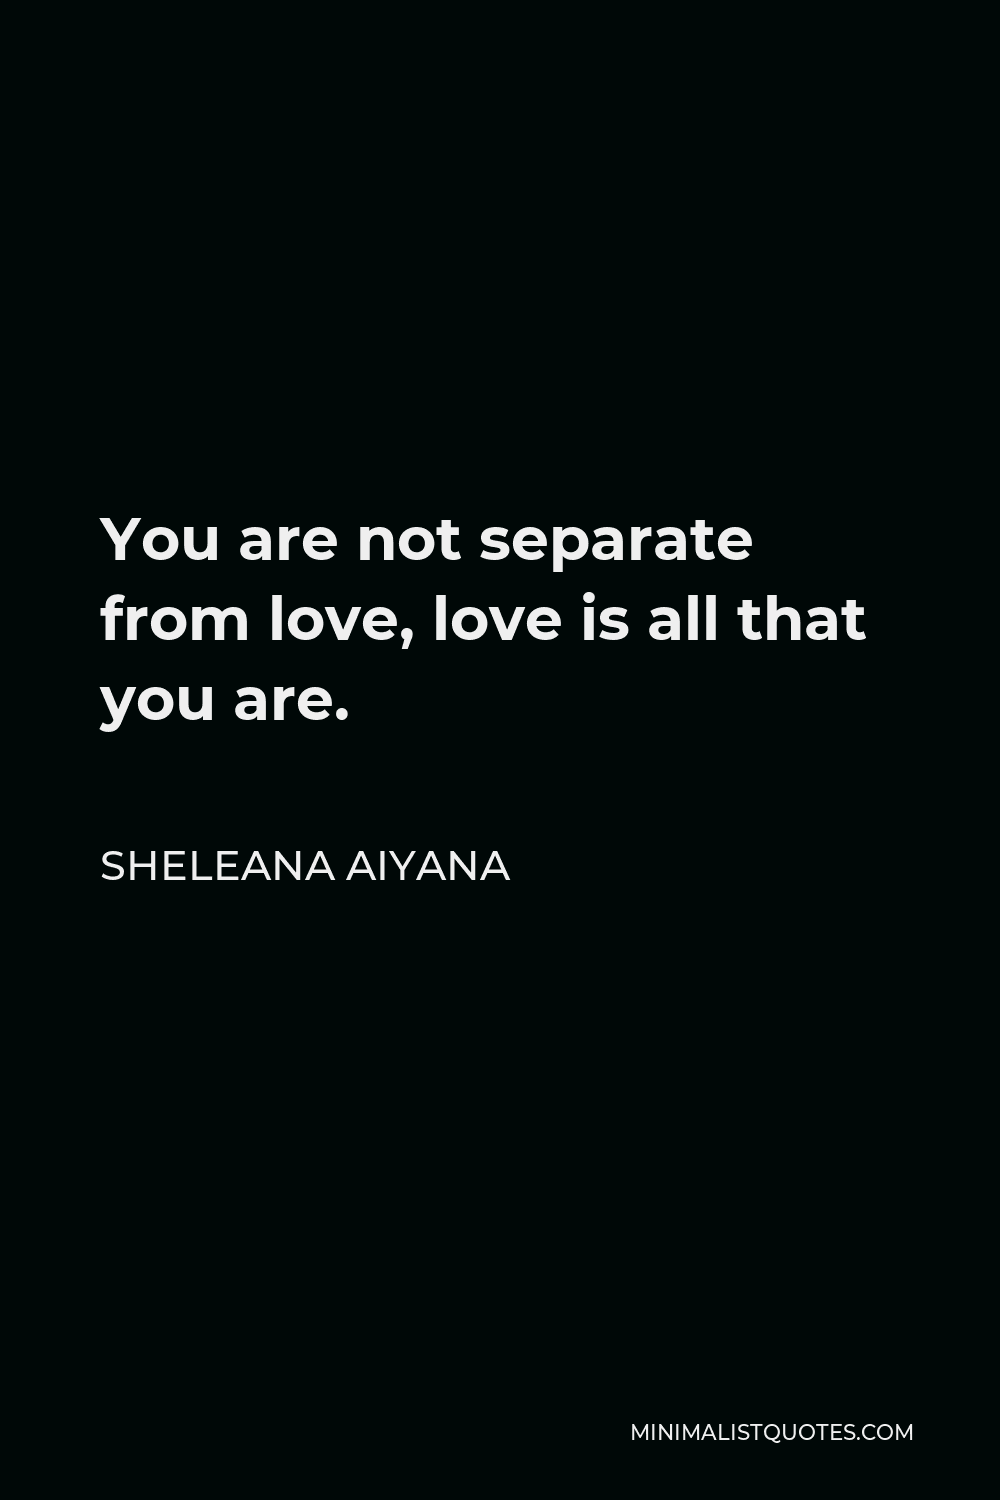 Sheleana Aiyana Quote - You are not separate from love, love is all that you are.